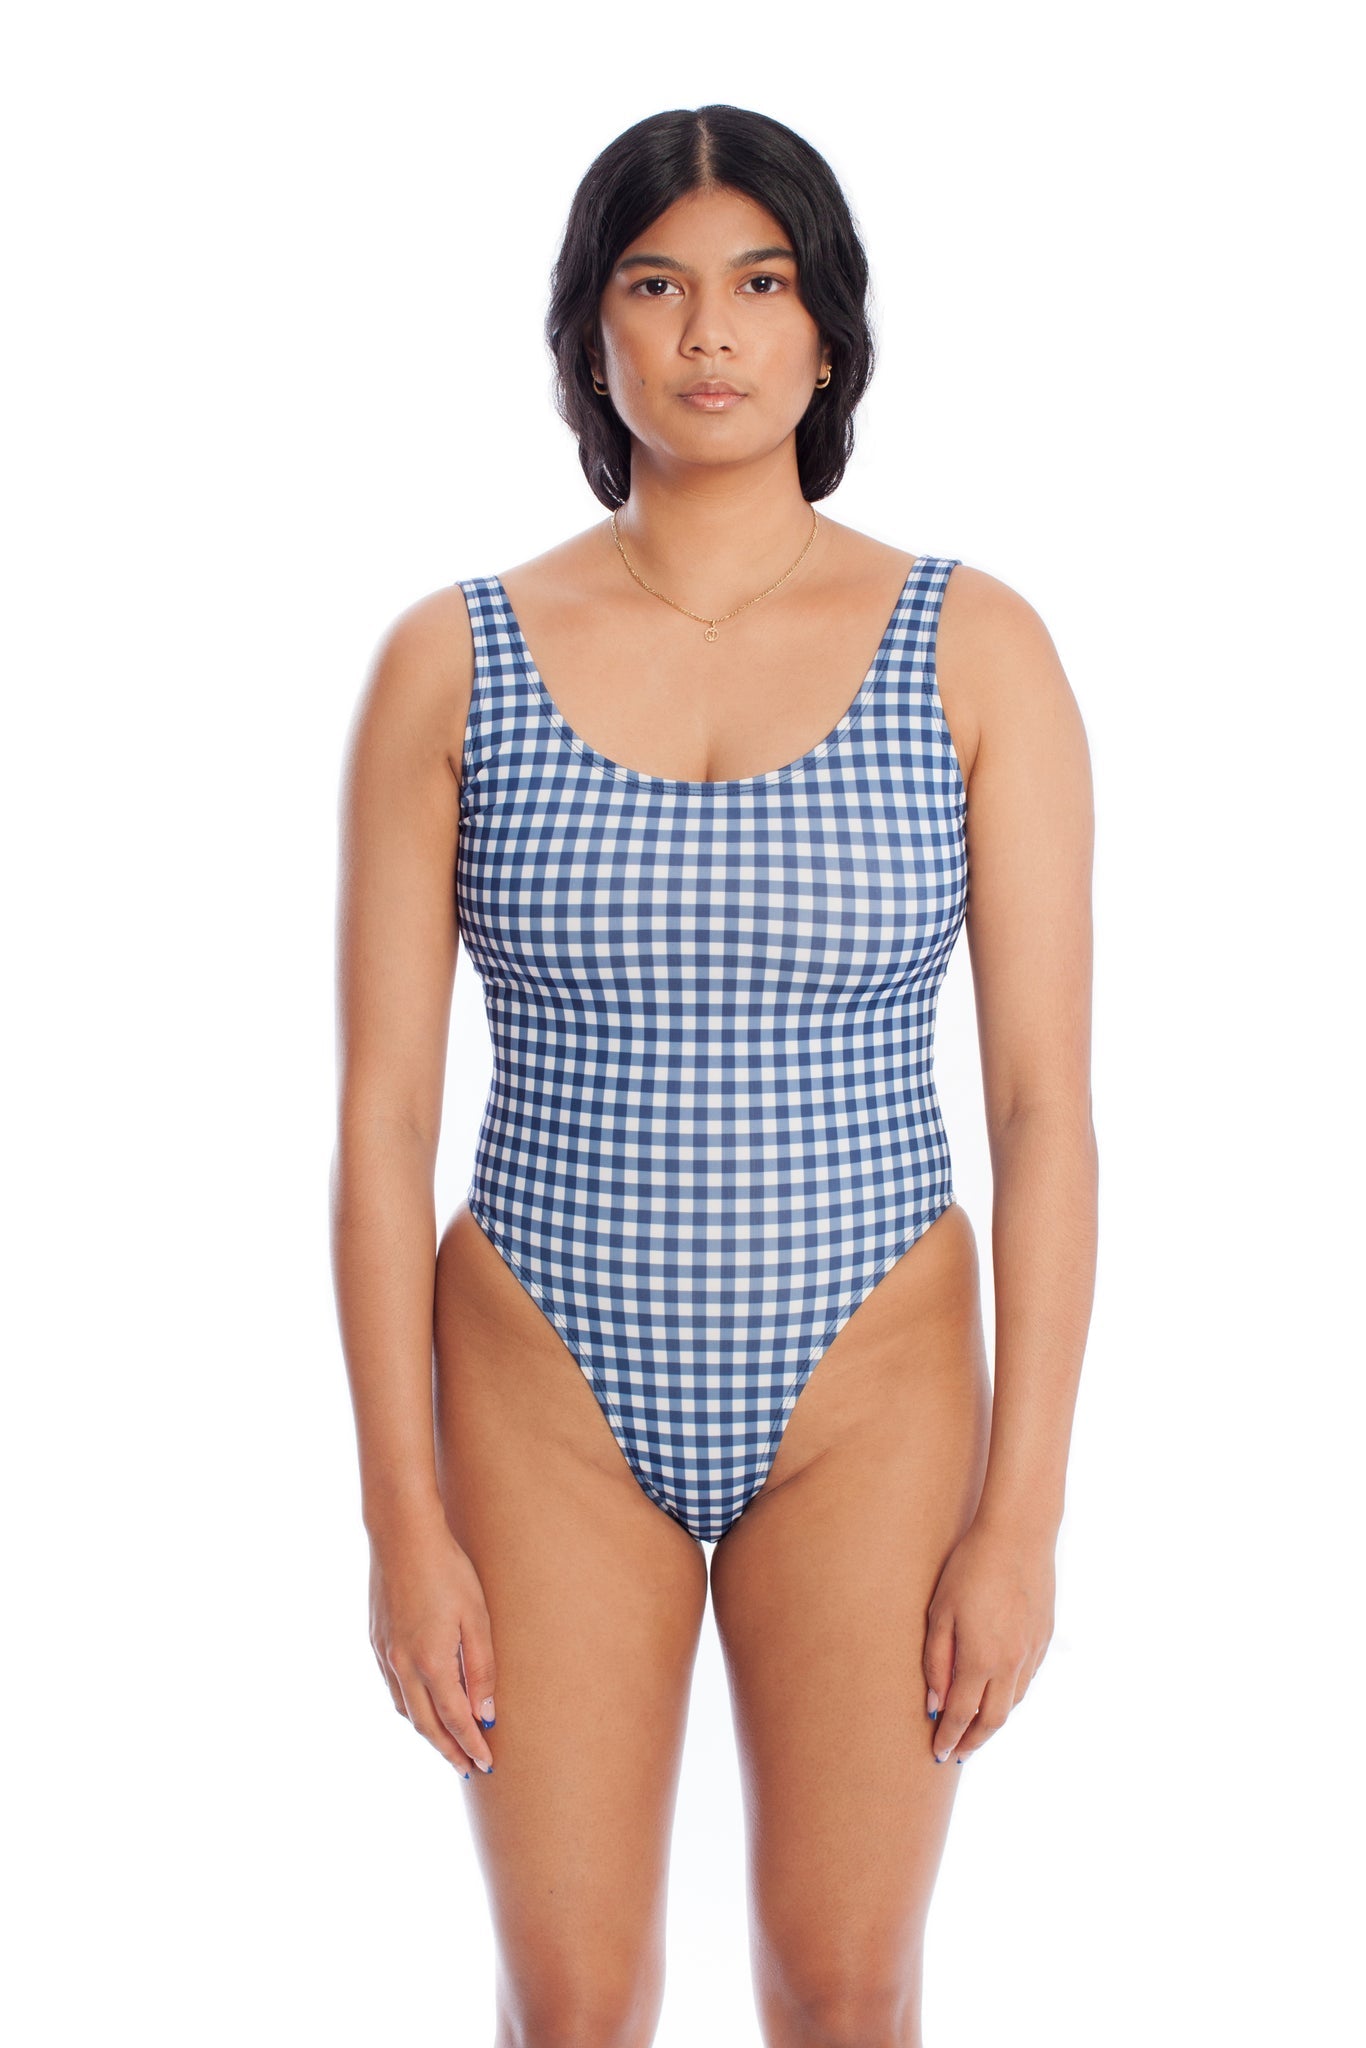 Minnow Bathers Soleil Top (Gingham) - Victoire Boutique - Bathing Suit -  Minnow Bathers - Victoire Boutique - ethical sustainable boutique shopping  Ottawa made in Canada